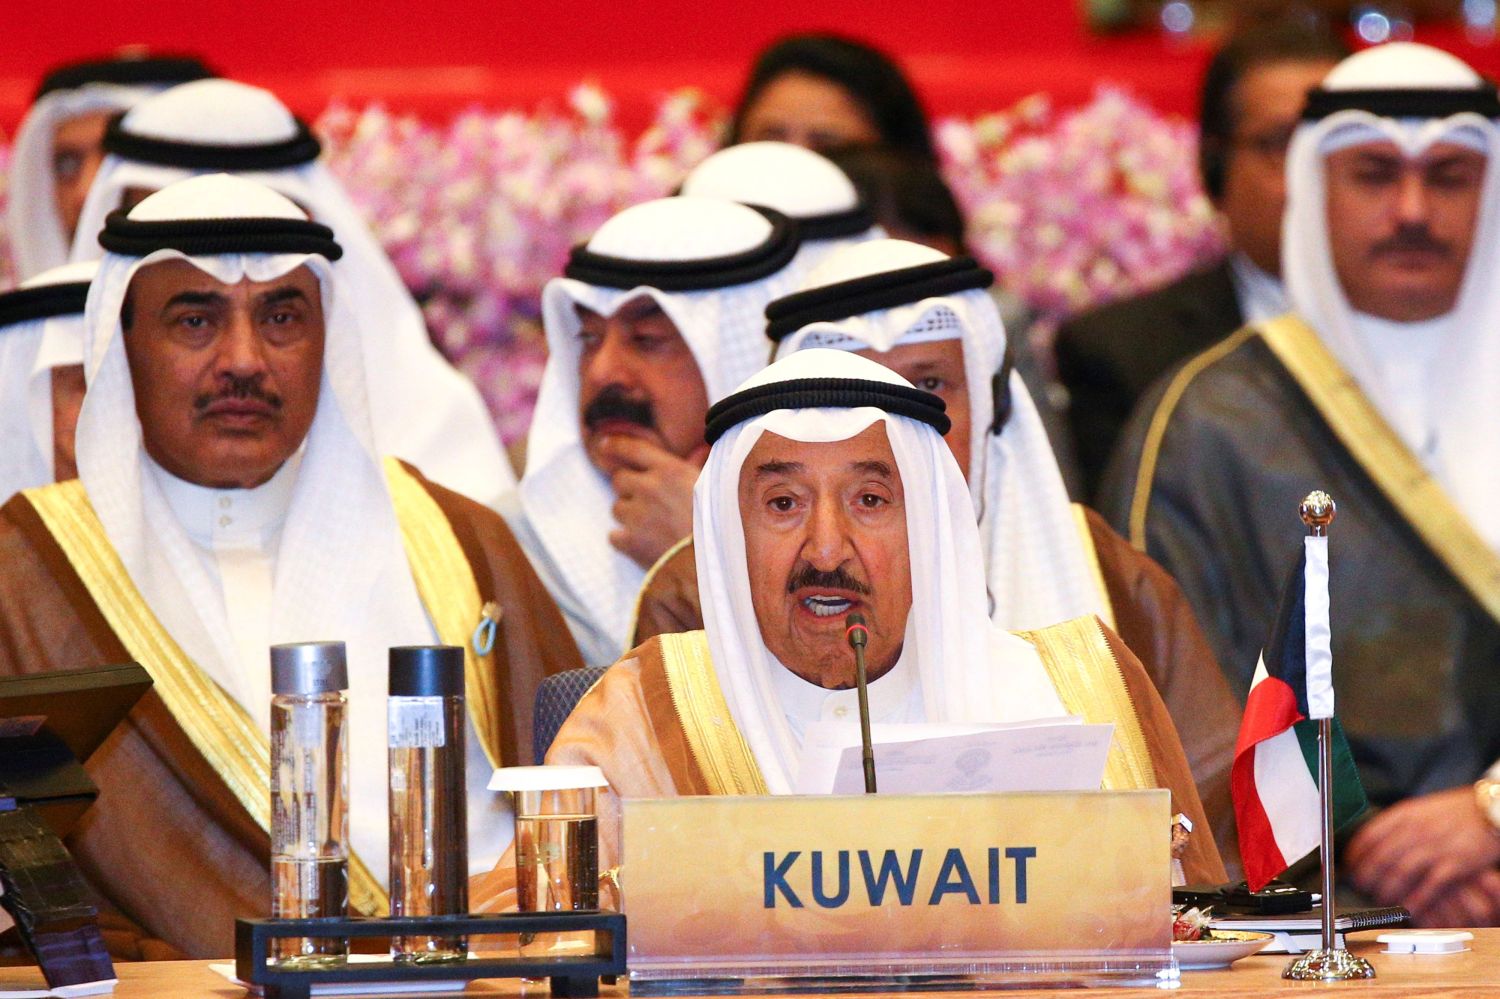 FILE PHOTO: Kuwait's Emir Sheikh Sabah Al-Ahmed Al-Jaber Al-Sabah speaks during a meeting at the Asia Cooperation Dialogue (ACD) summit at the Foreign Ministry in Bangkok, Thailand, October 10, 2016. REUTERS/Athit Perawongmetha/File Photo